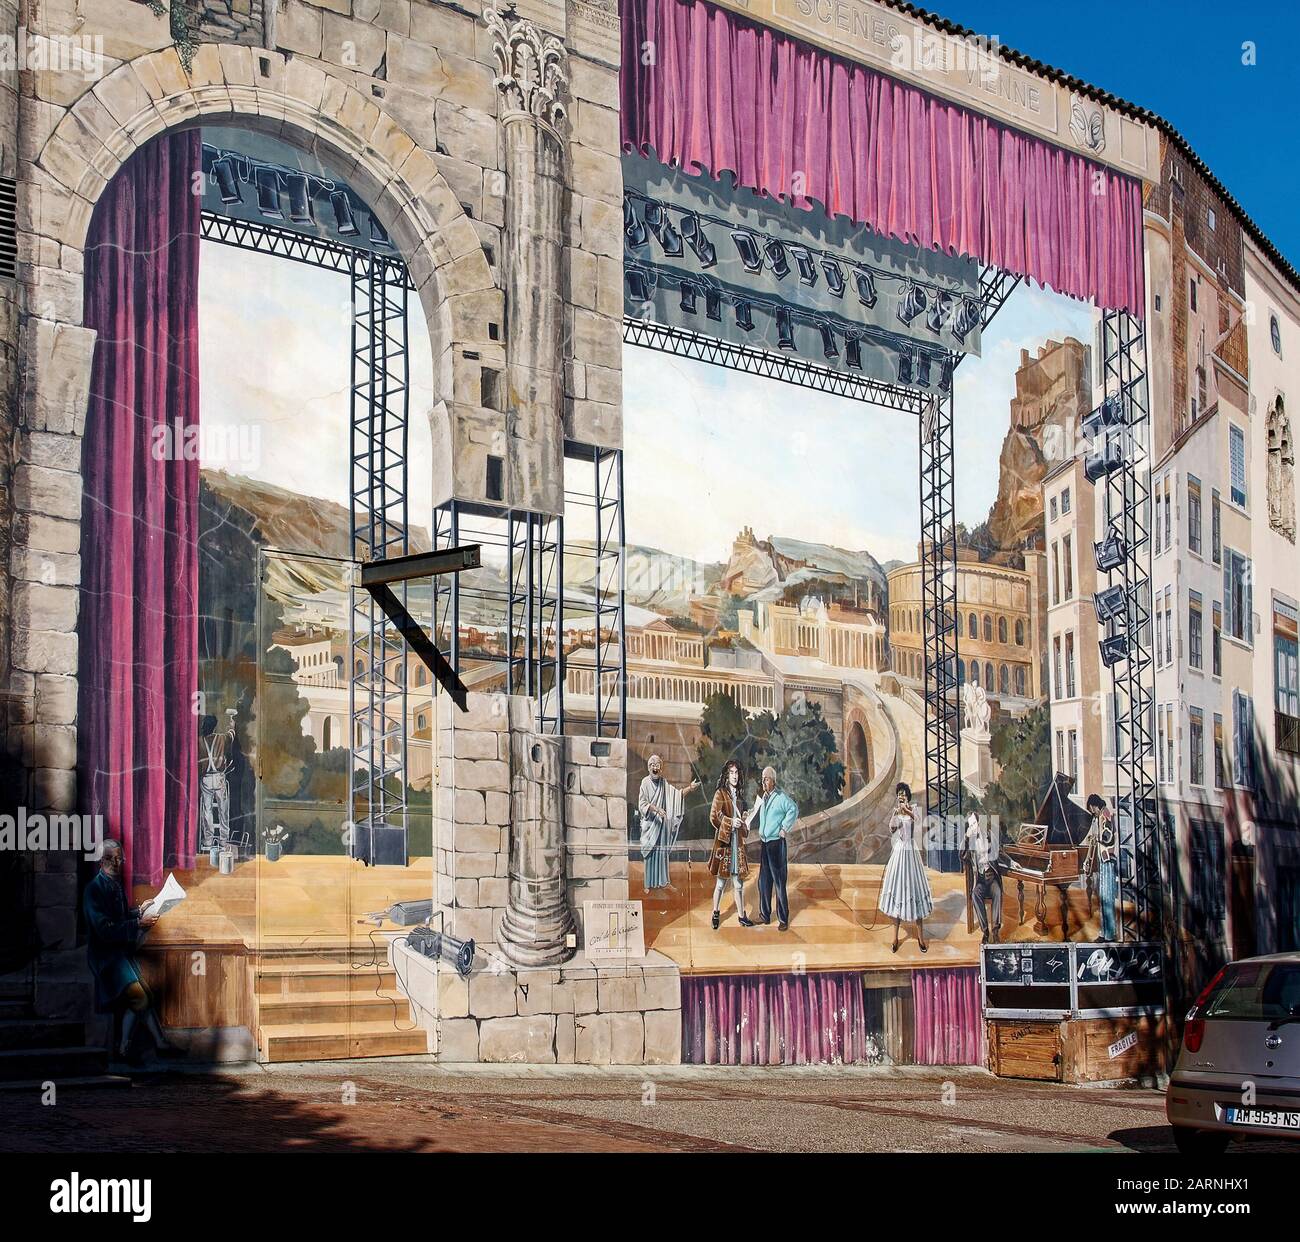 mural, theater stage scene, Trompe L'oeil painting, public art, Vienne, France, summer, horizontal Stock Photo